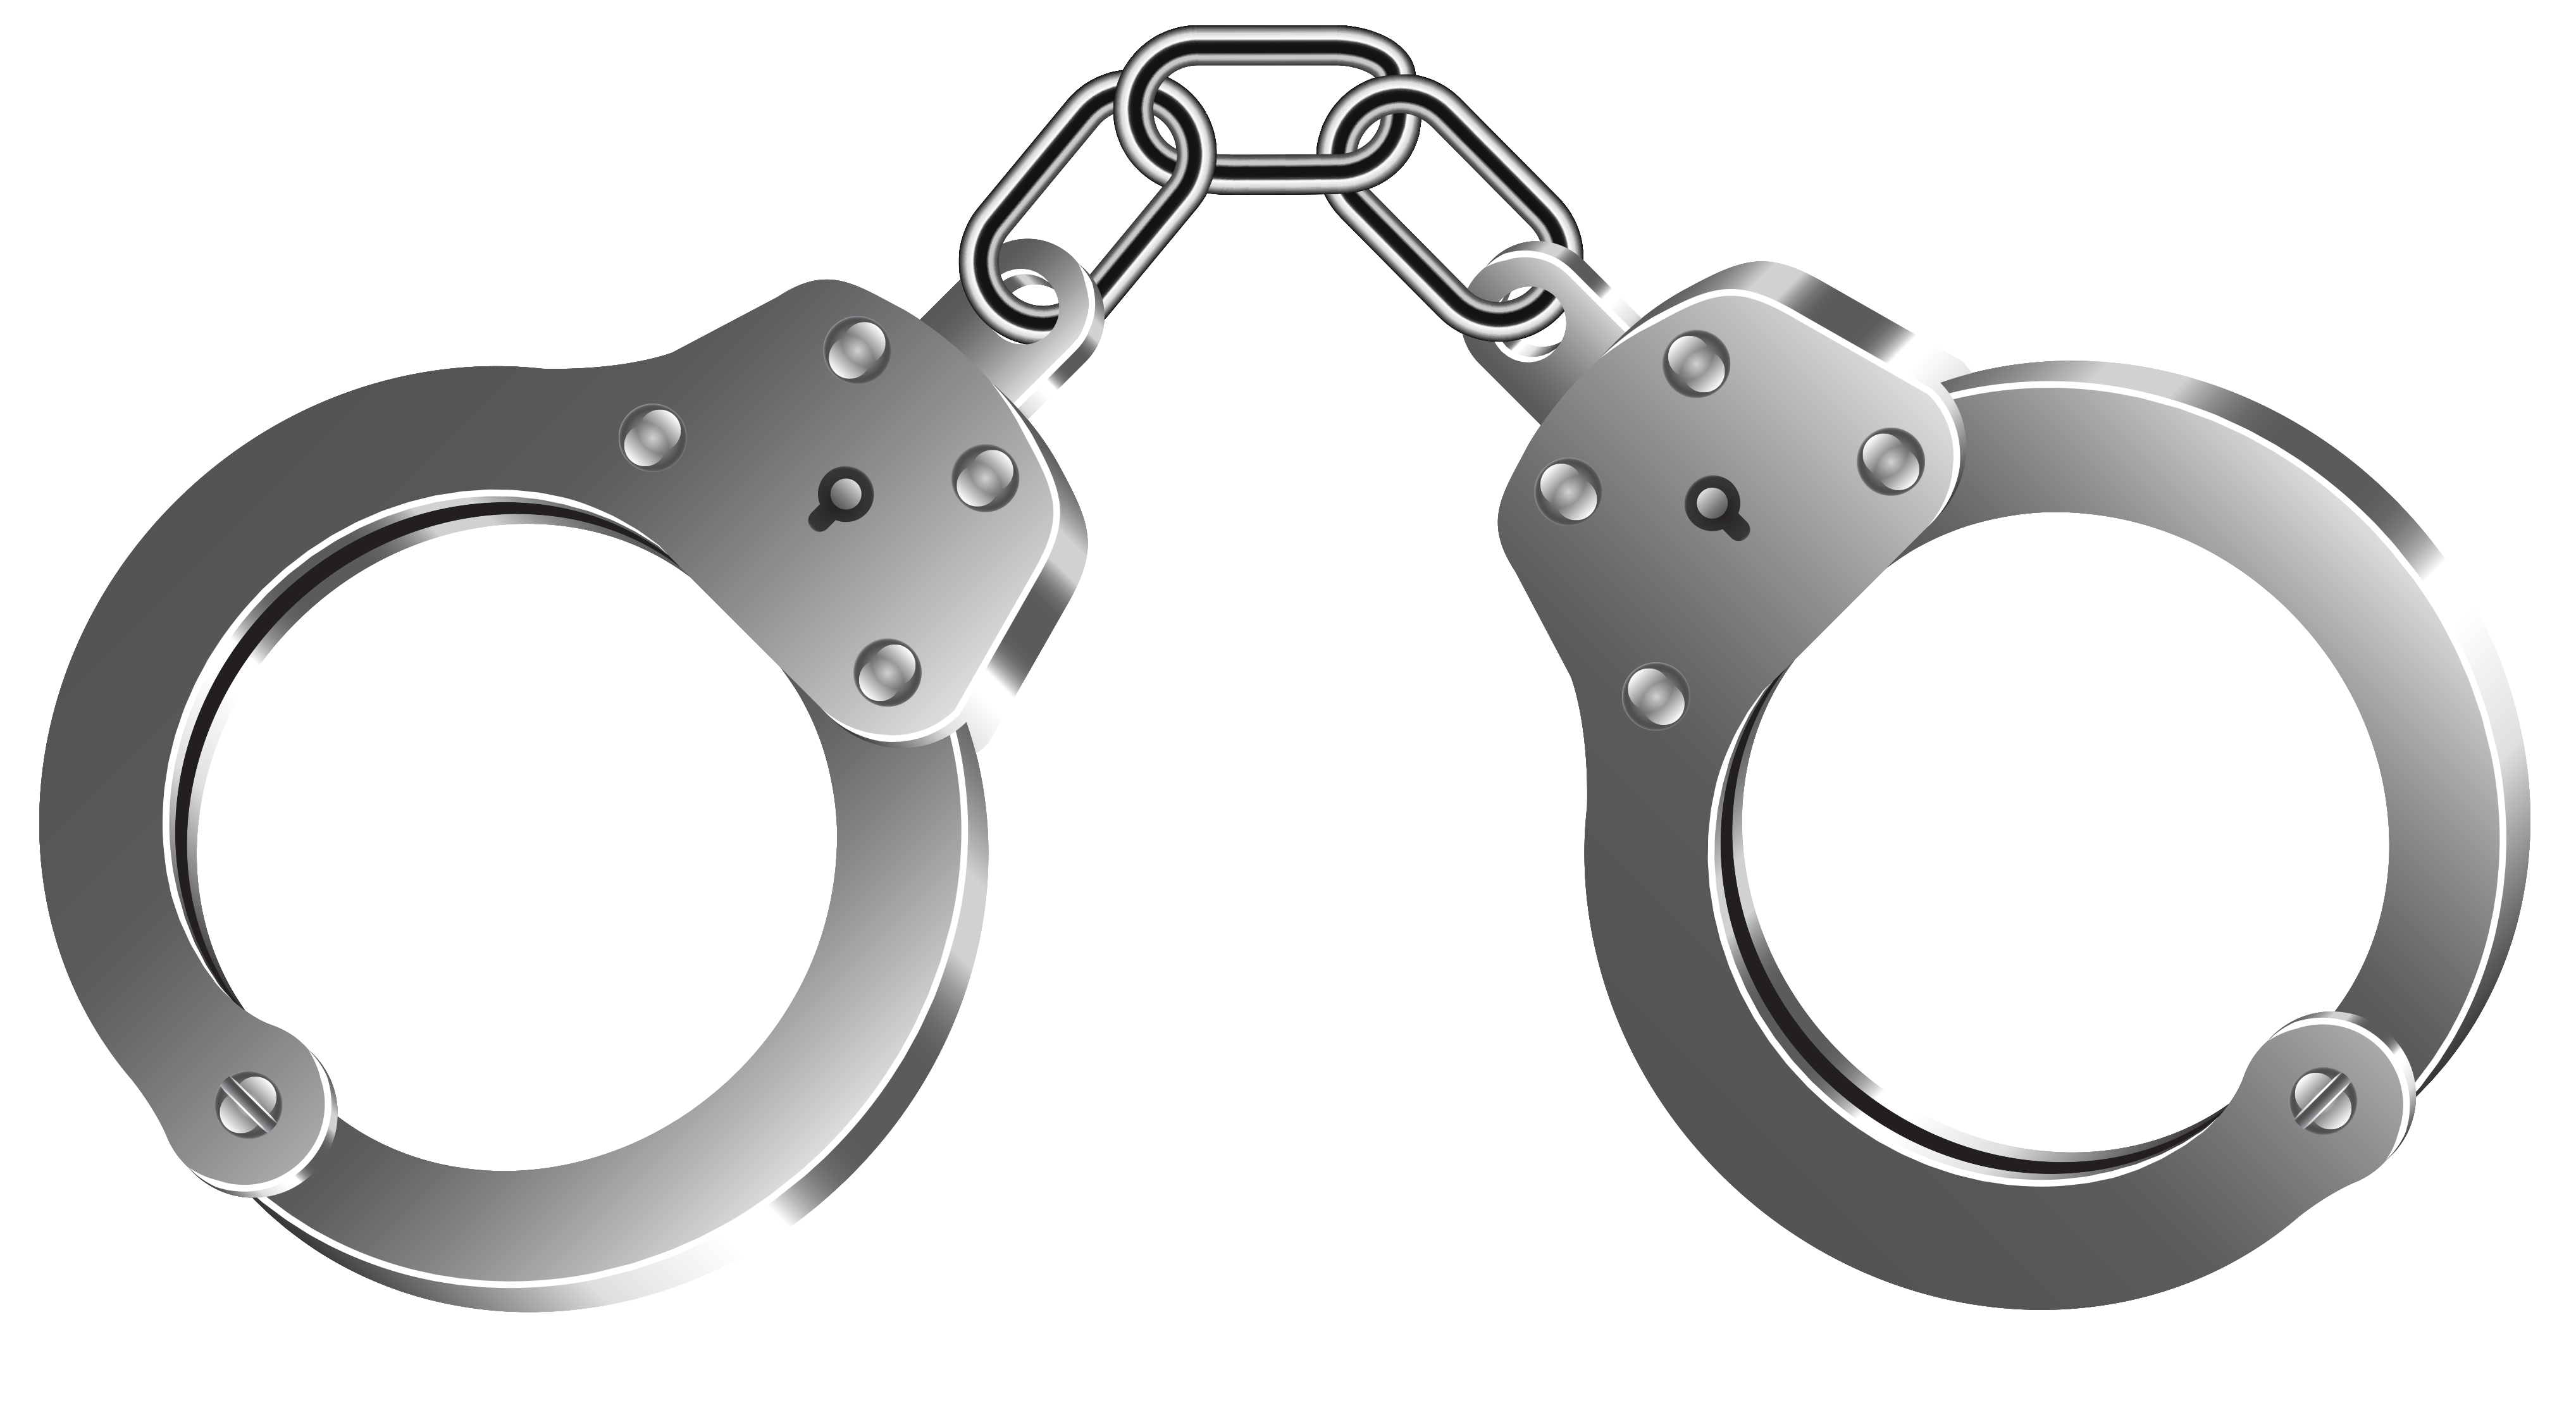 Amazing of handcuffs letters. Handcuff clipart tool